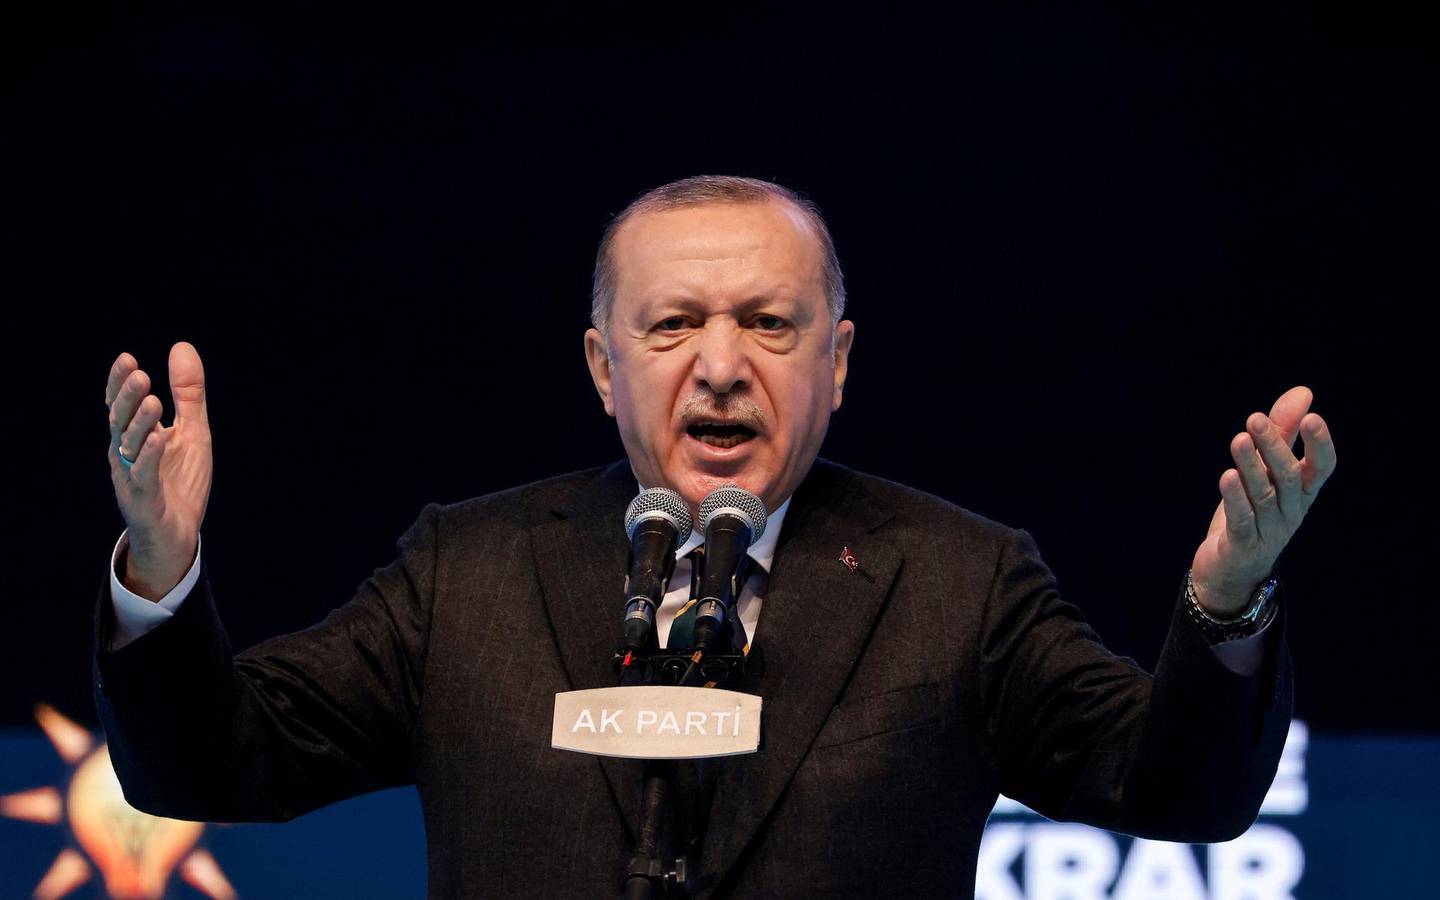 FILE PHOTO: Turkish President Tayyip Erdogan addresses his supporters during the Grand Congress of his ruling AK Party in Ankara, Turkey, March 24, 2021. REUTERS/Umit Bektas/File Photo